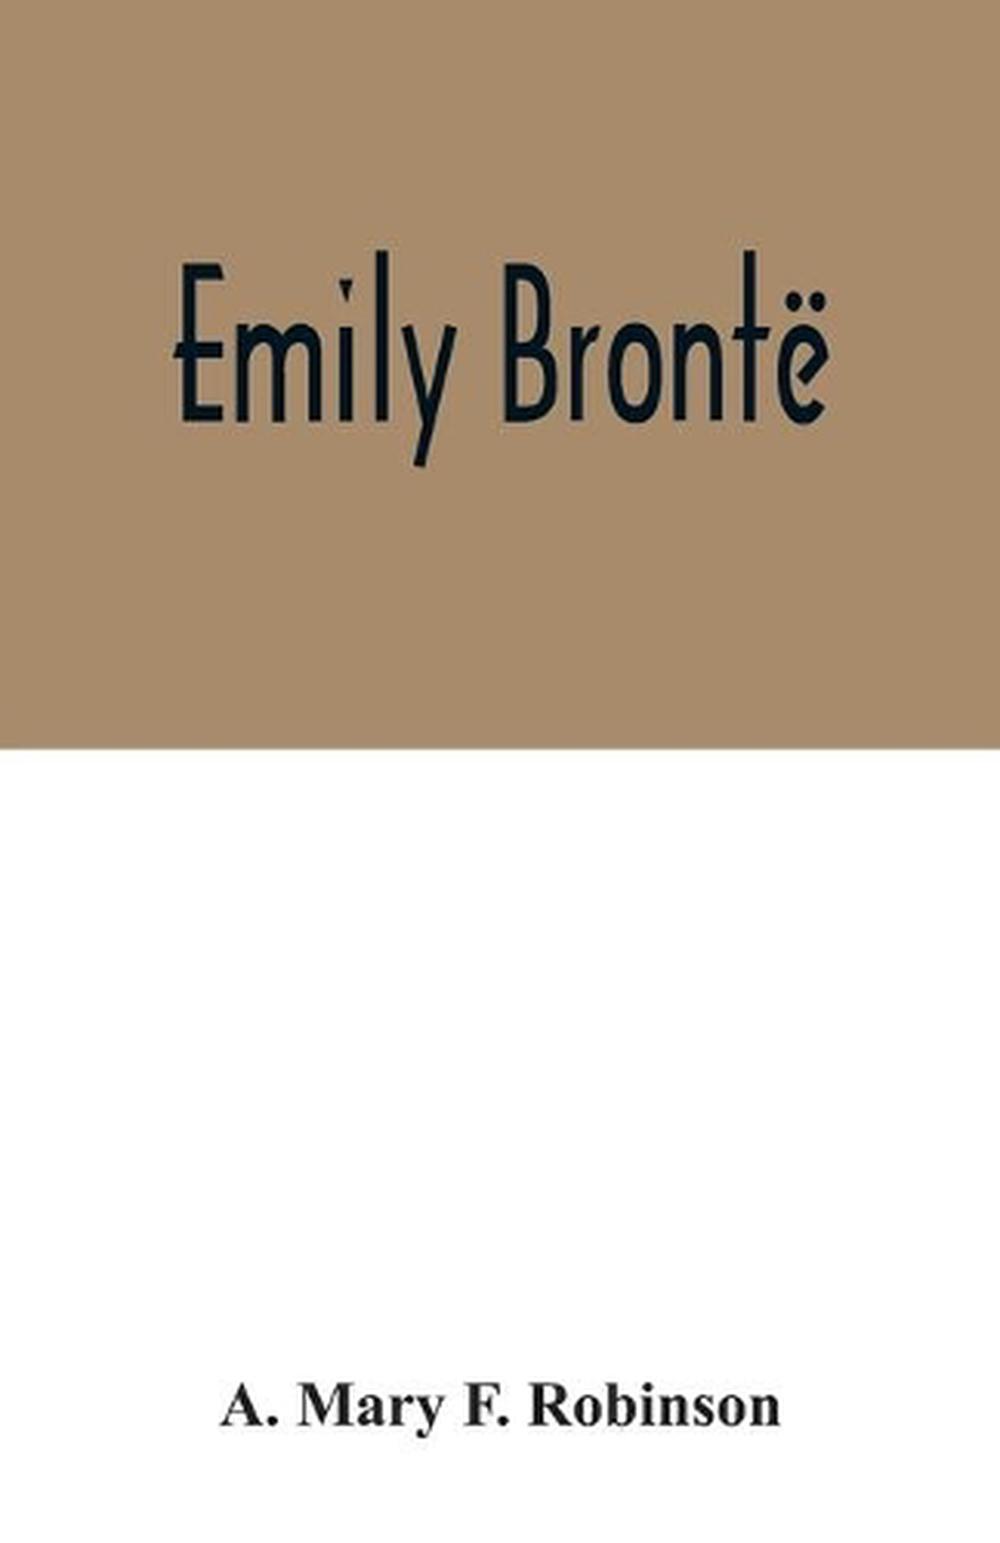 books written by emily bronte